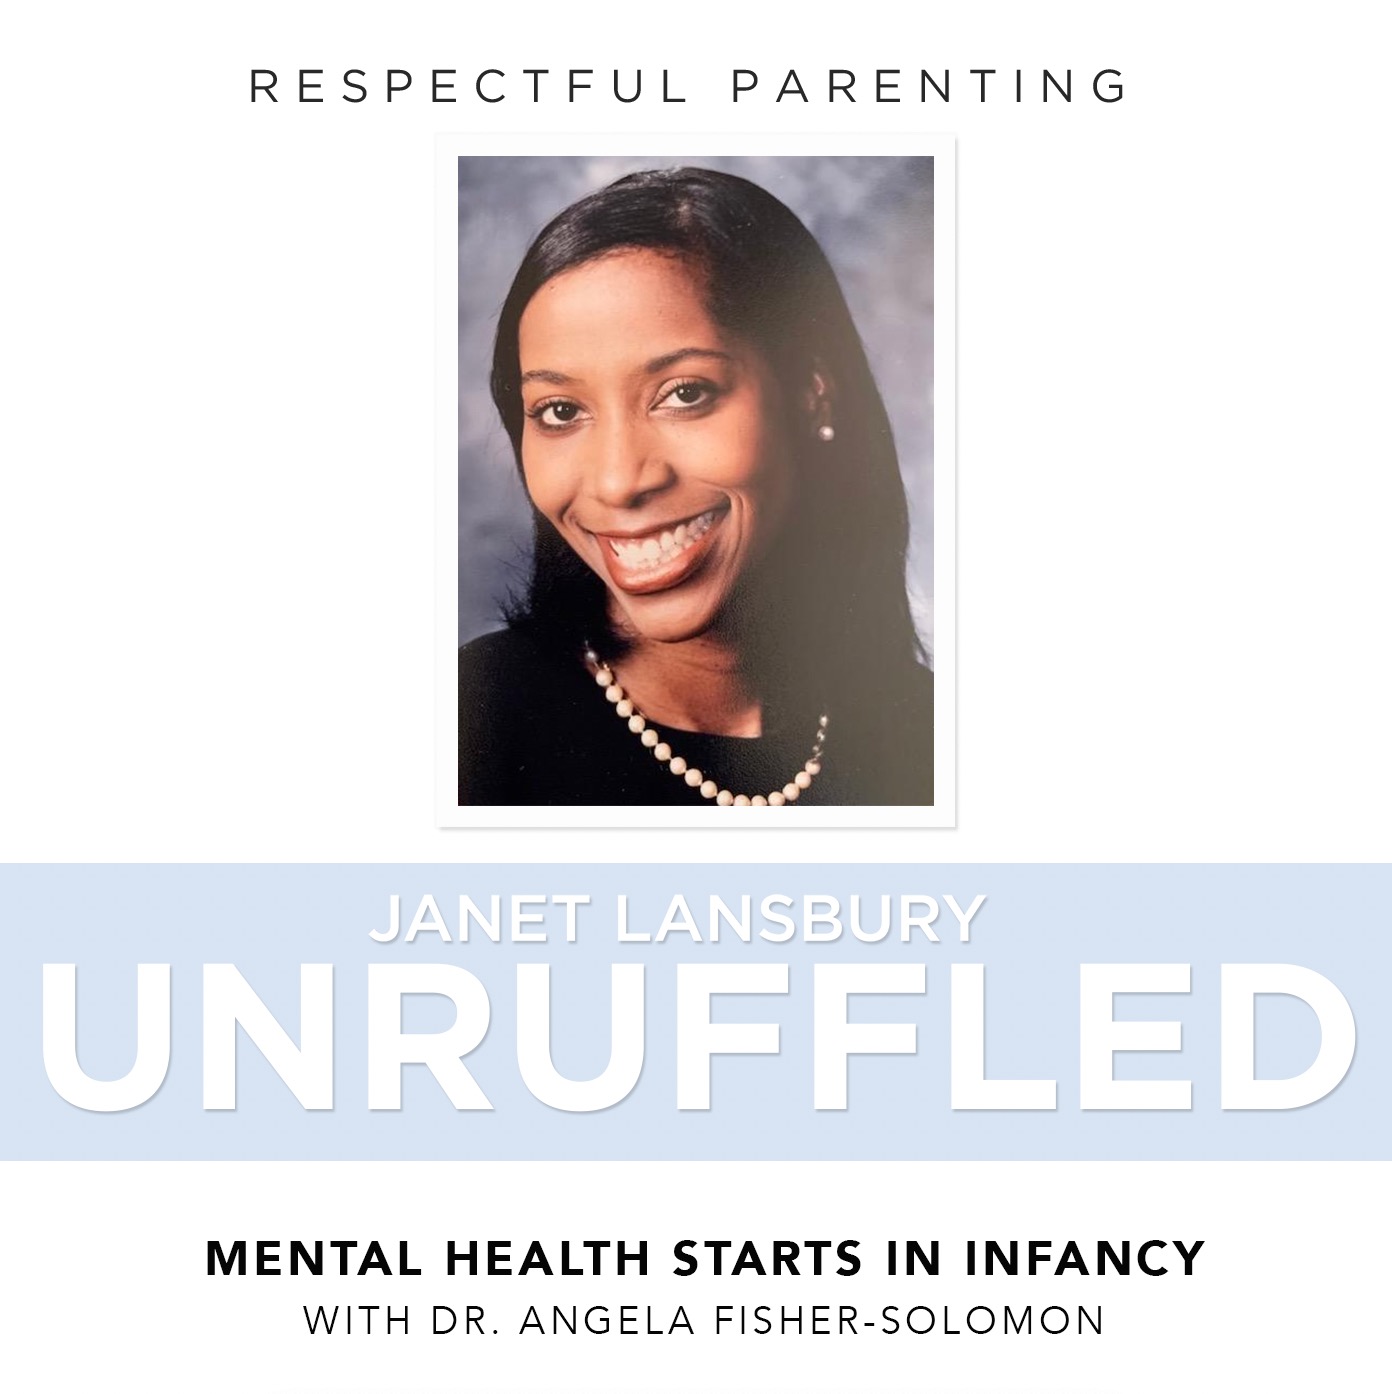 Mental Health Starts in Infancy (with Dr. Angela Fisher-Solomon)